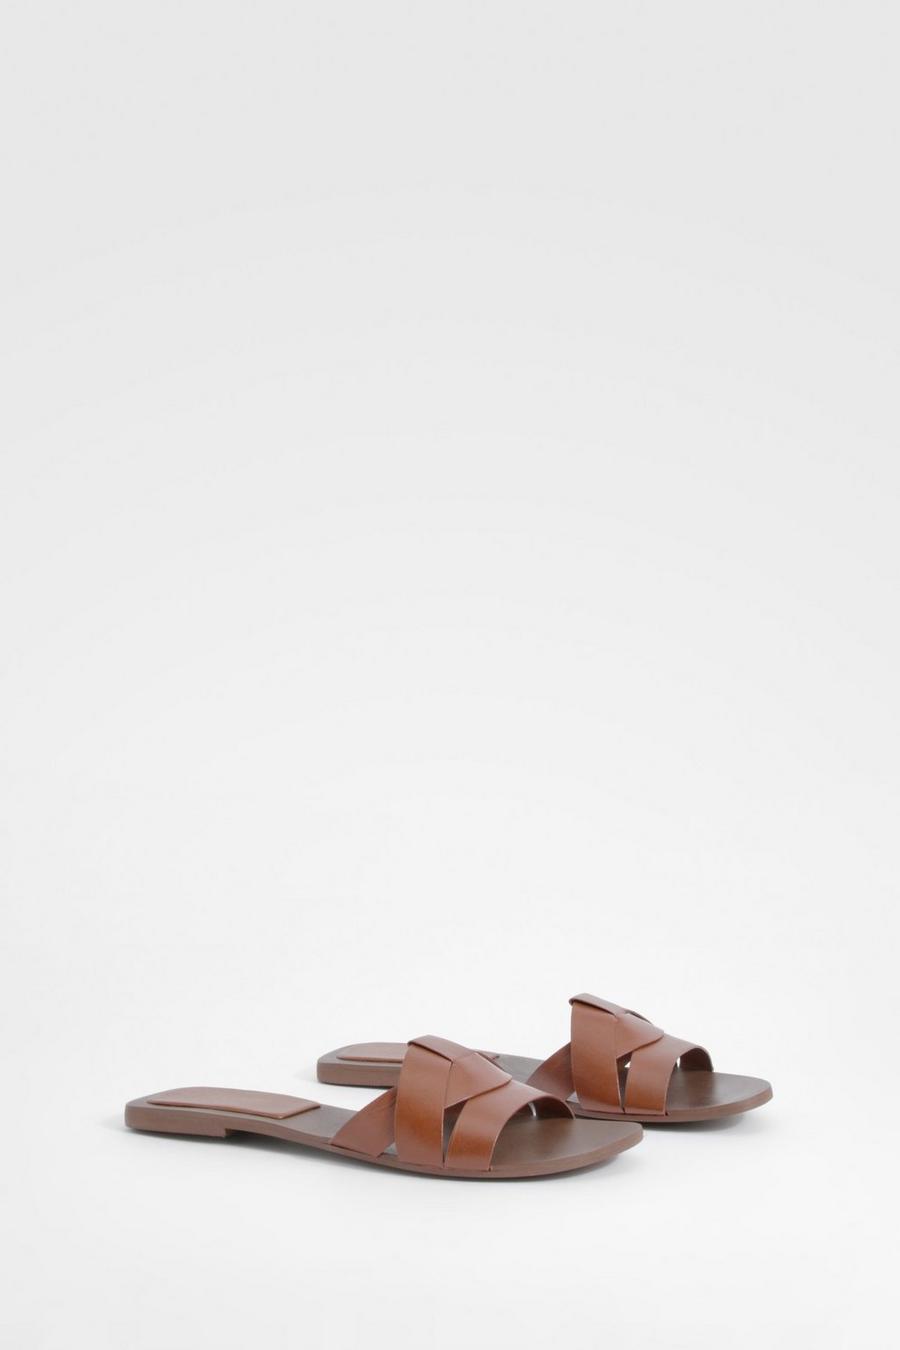 Tan Woven Leather Mule Sandals image number 1